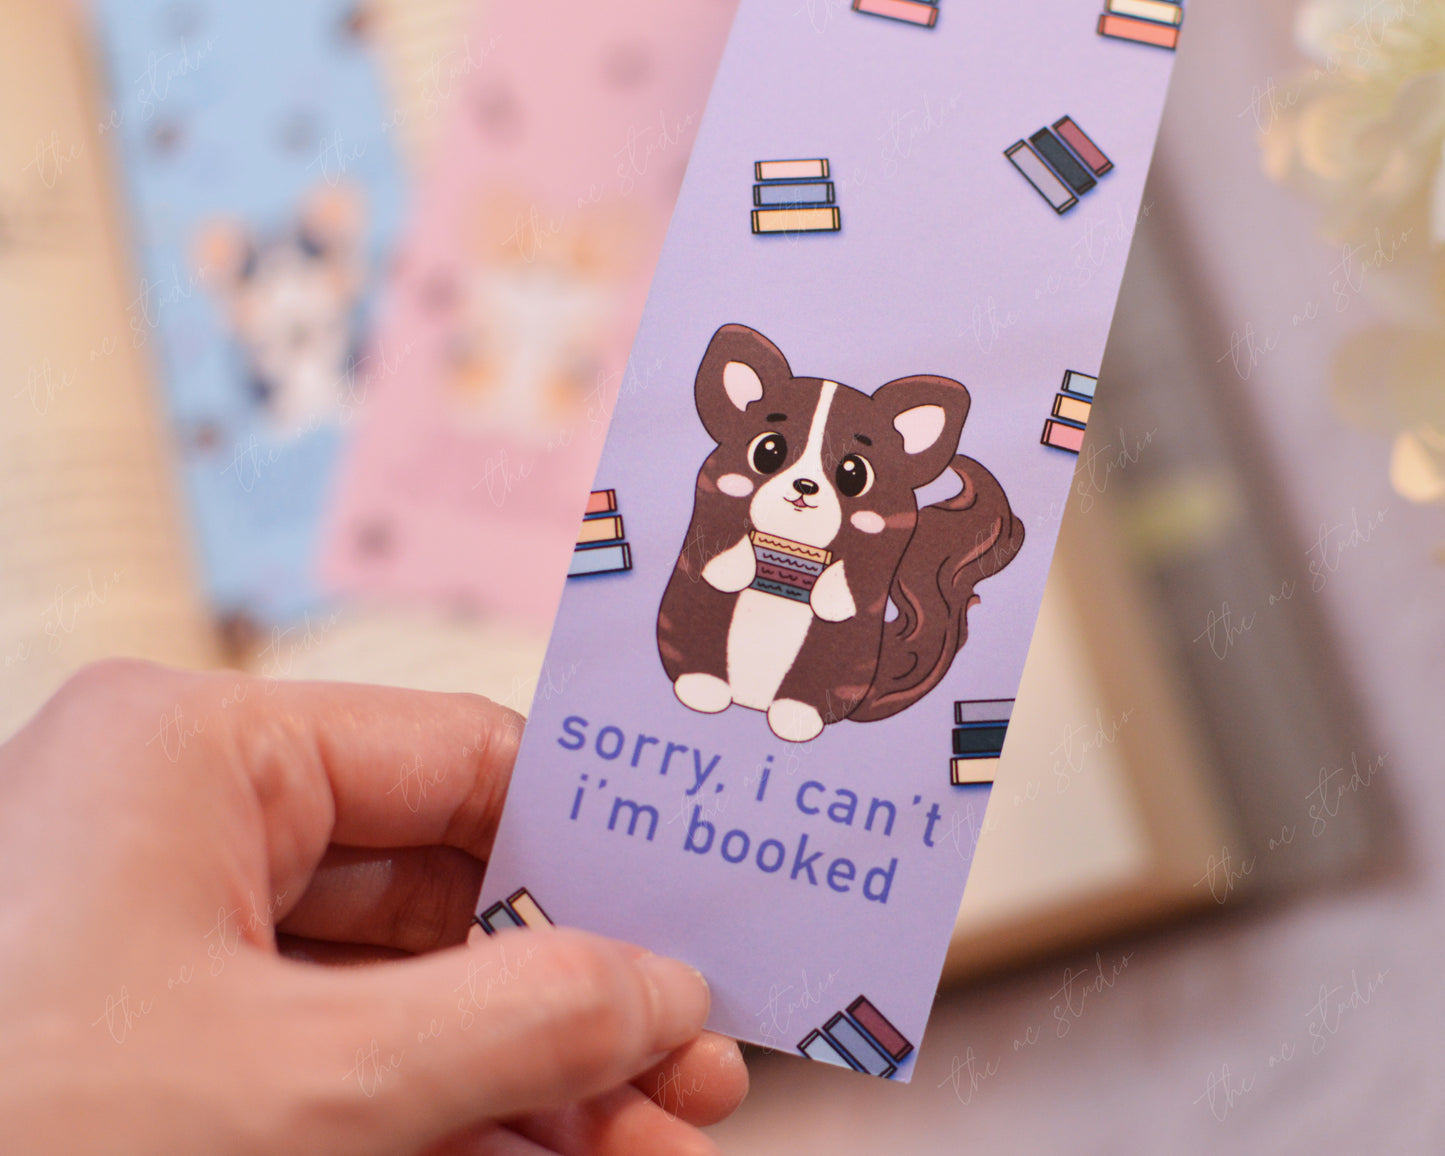 Sorry, I can't. I'm booked Bookmark